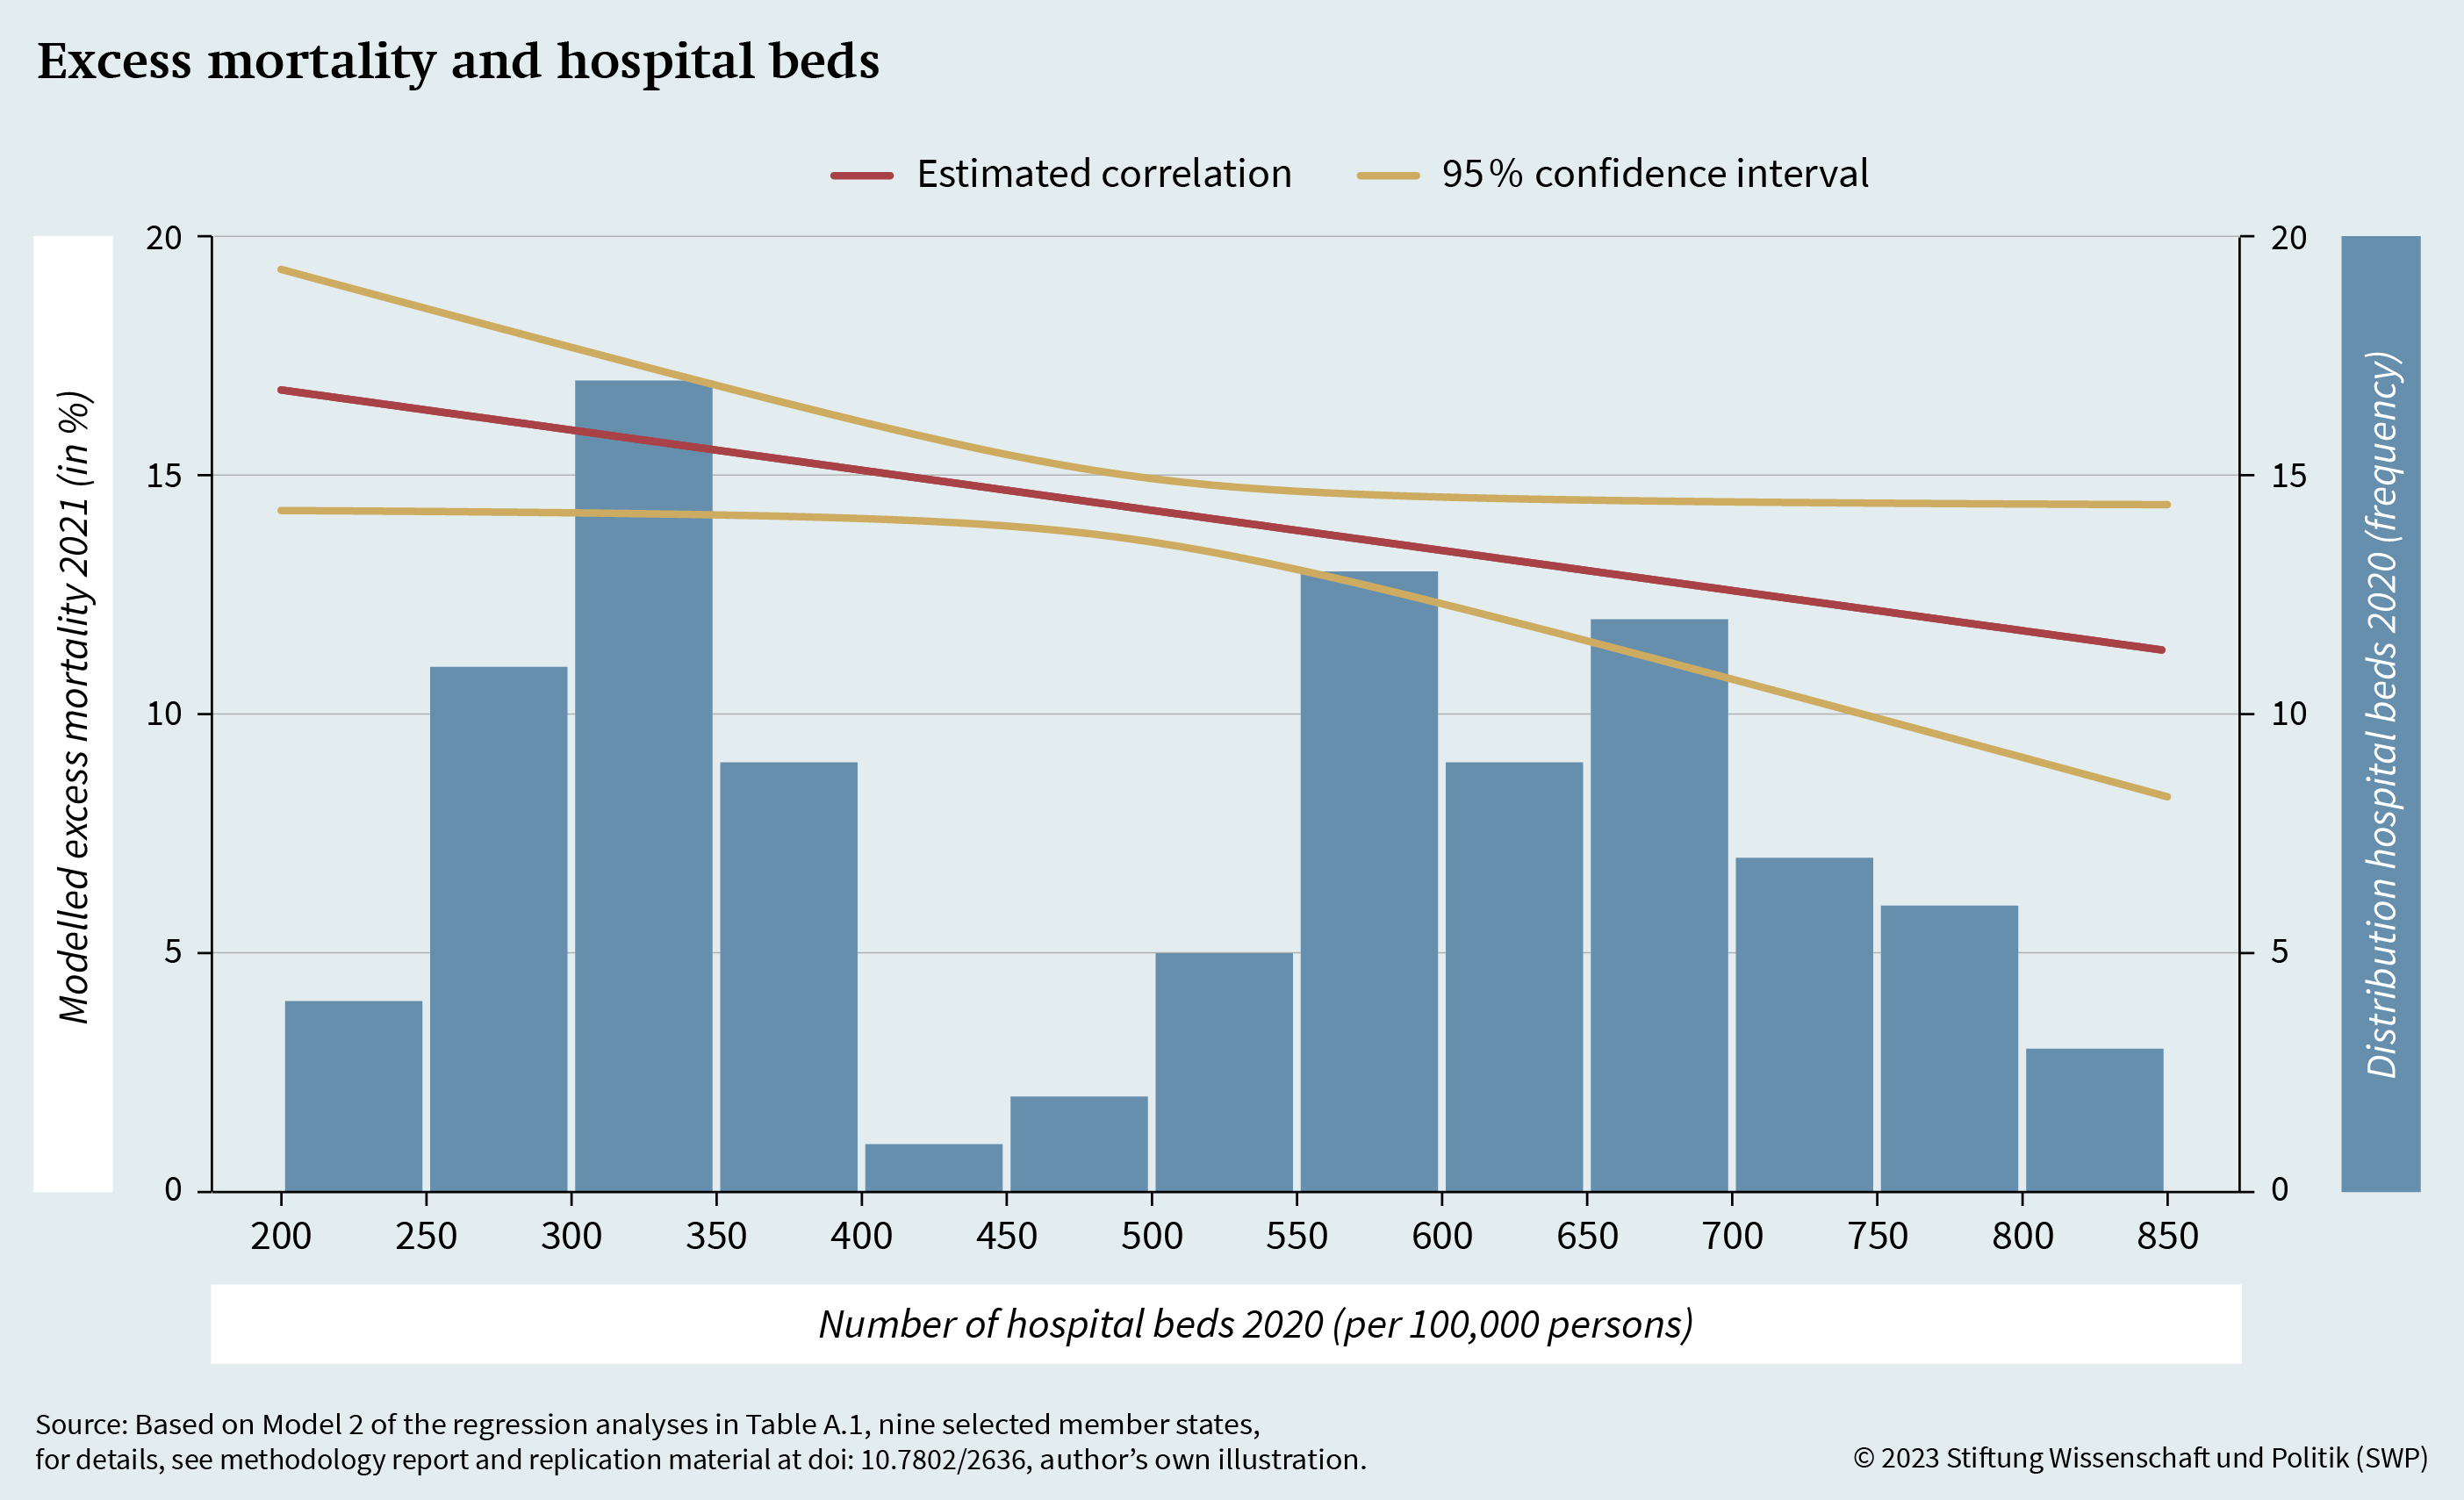 Figure 10: Excess mortality and hospital beds